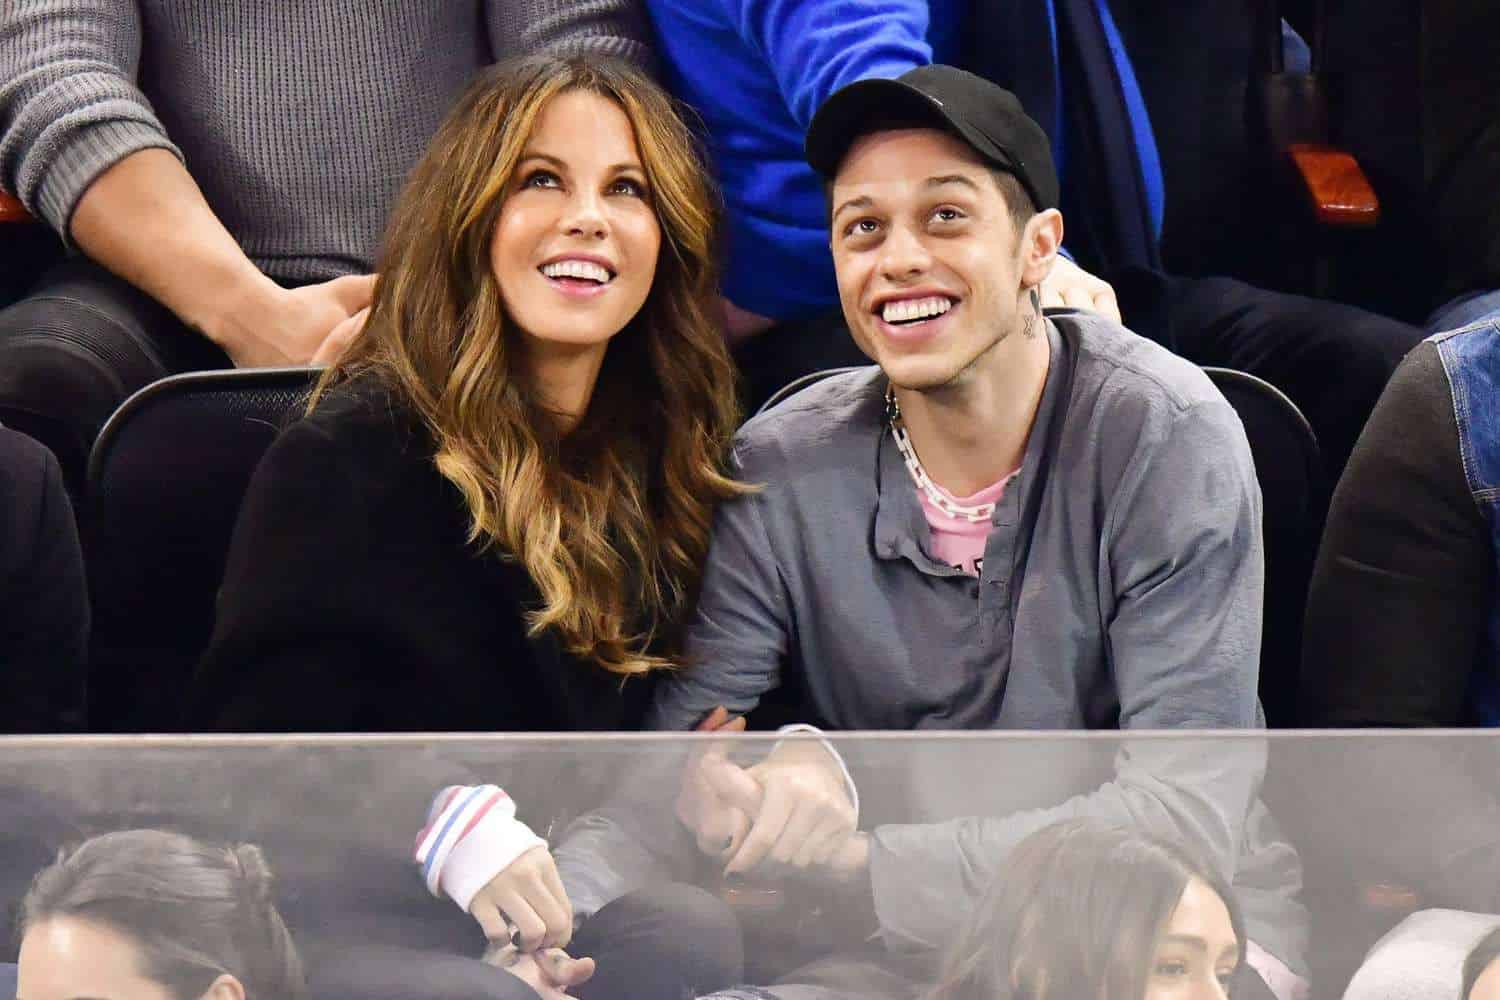 Kate Beckinsale’s dating history